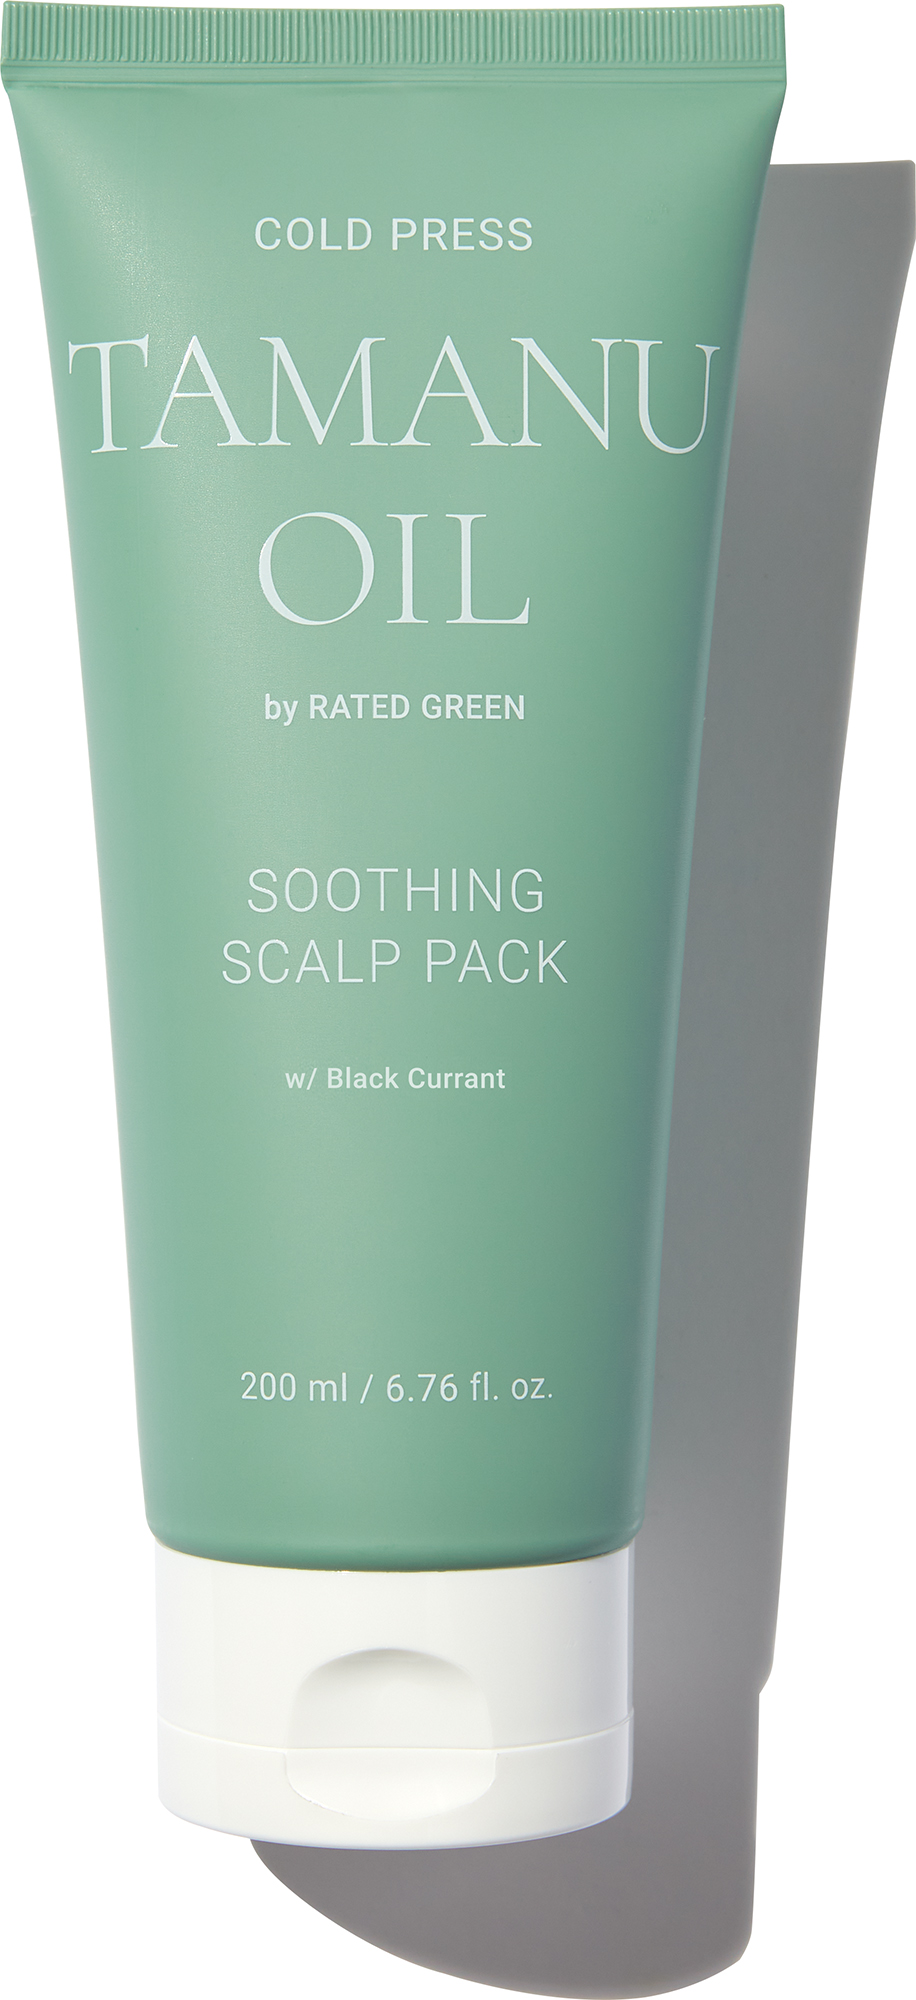 https://lyko.com/globalassets/product-images/rated-green-scalp-pack-cold-press-tamanu-oil-soothing-scalp-pack-black-currant-200ml-3331-108-0200_1.jpg?ref=714854D060